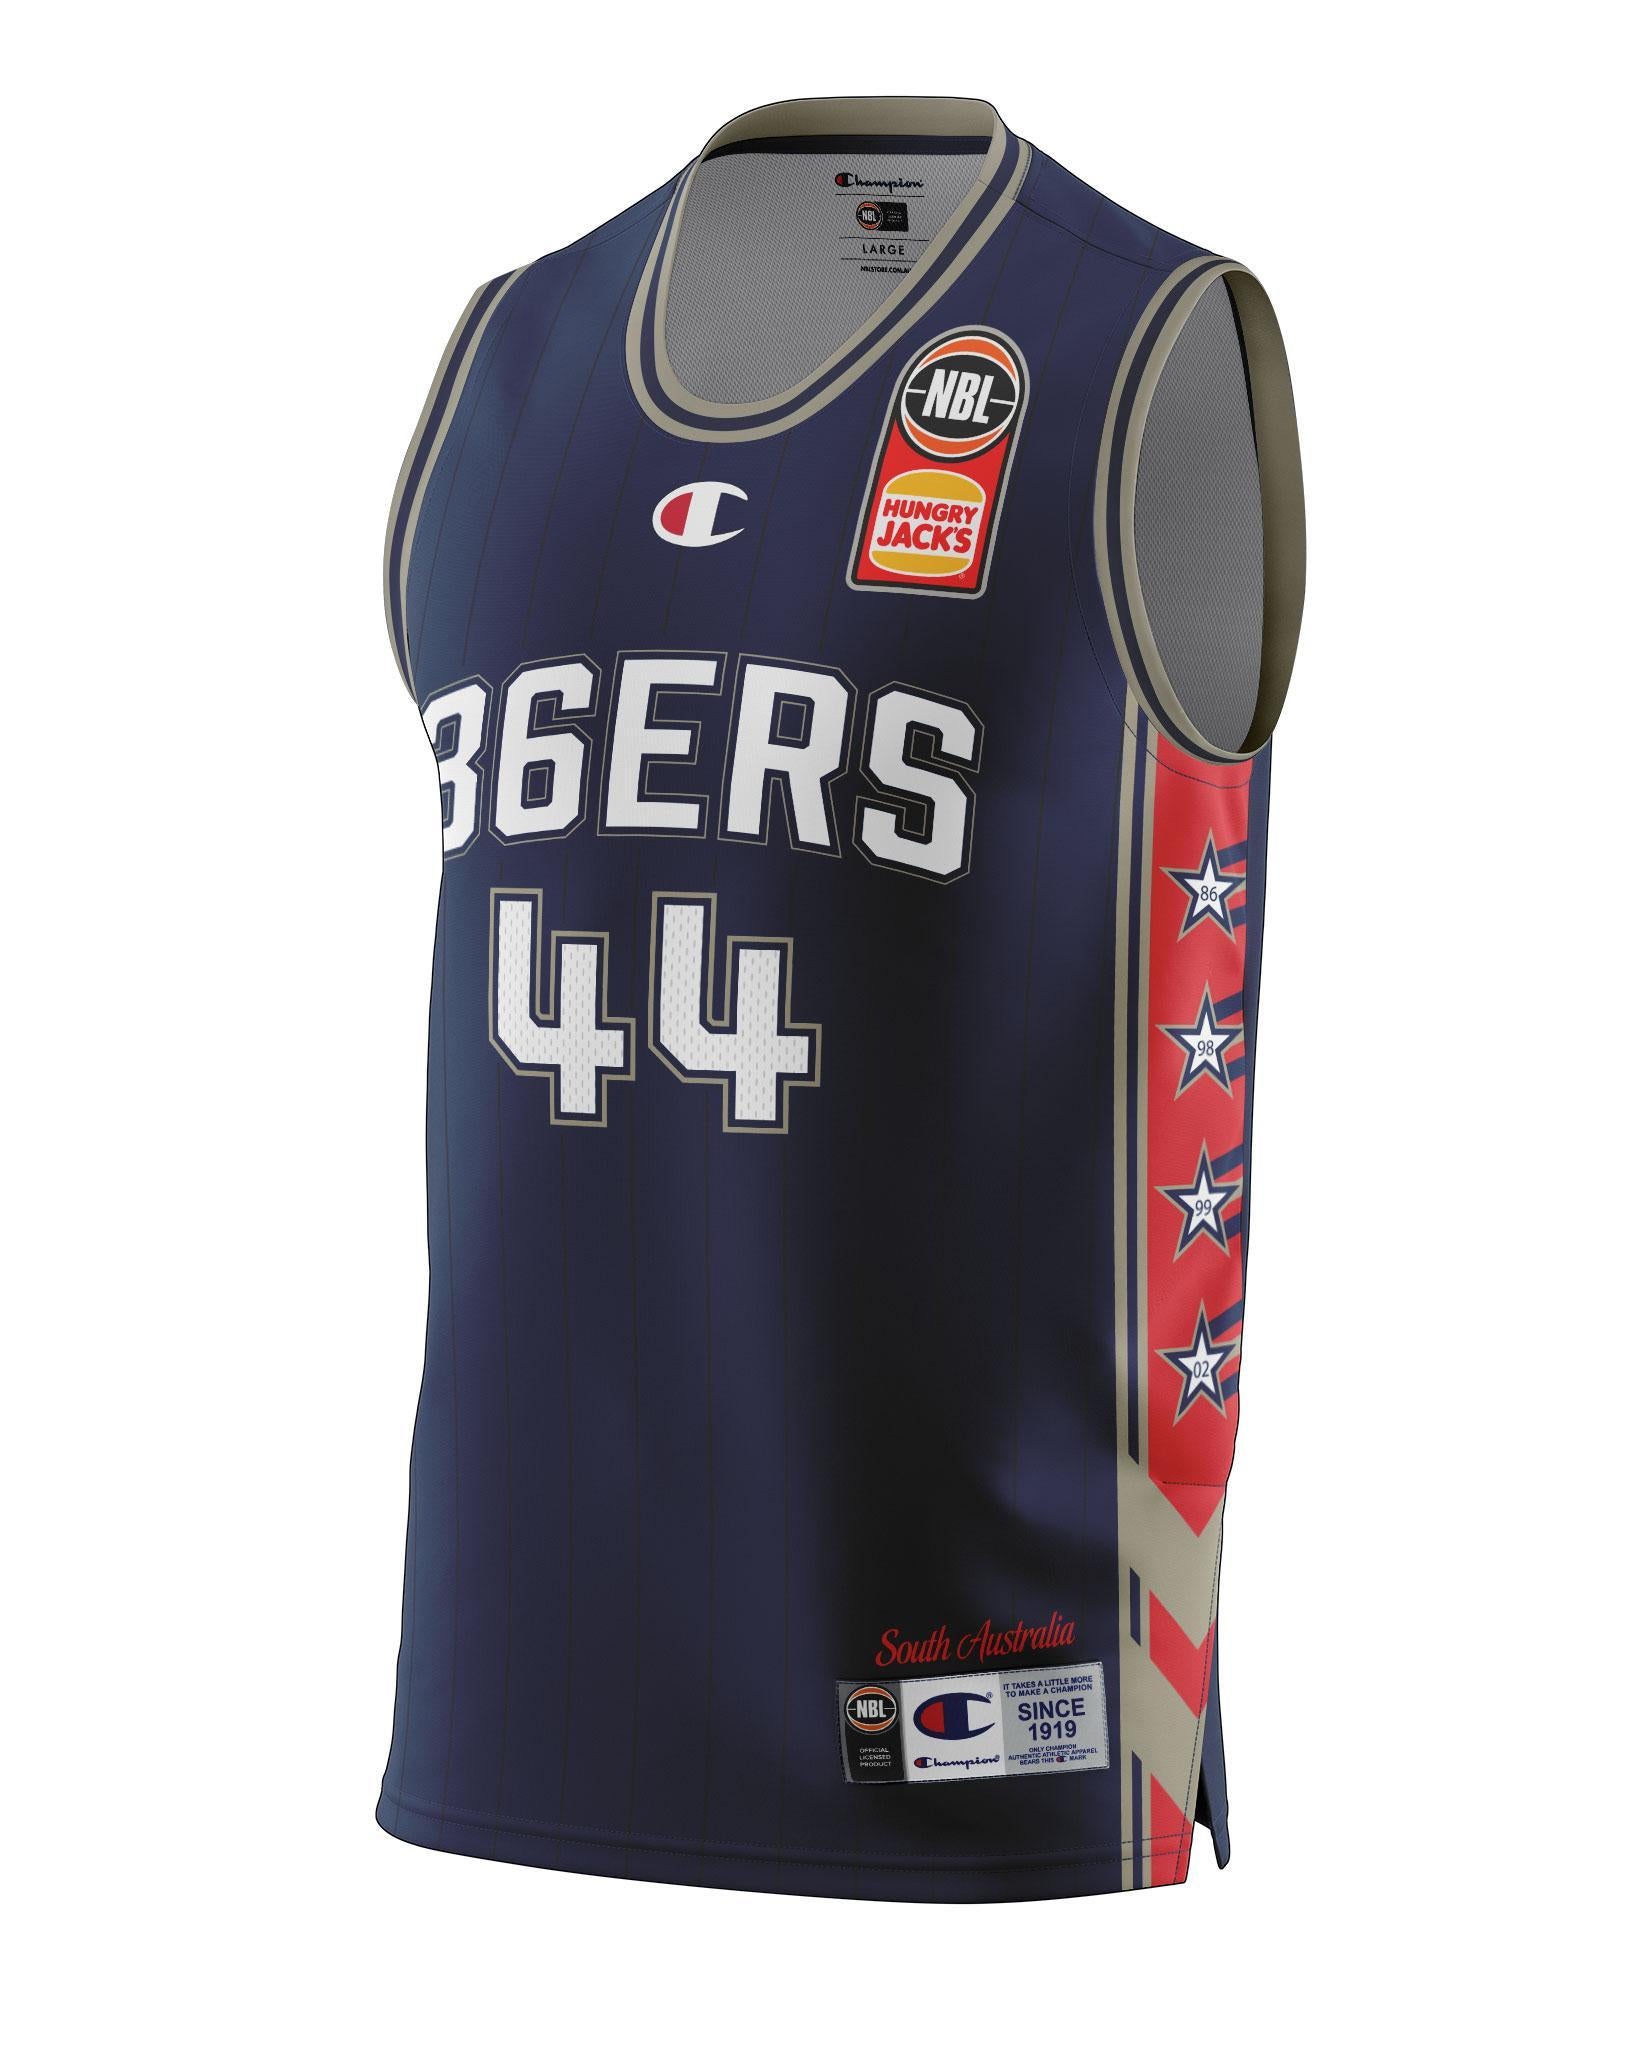 Adelaide 36ers 2021/22 Authentic Adult Home Jersey - Sunday Dech - Adelaide 36ers